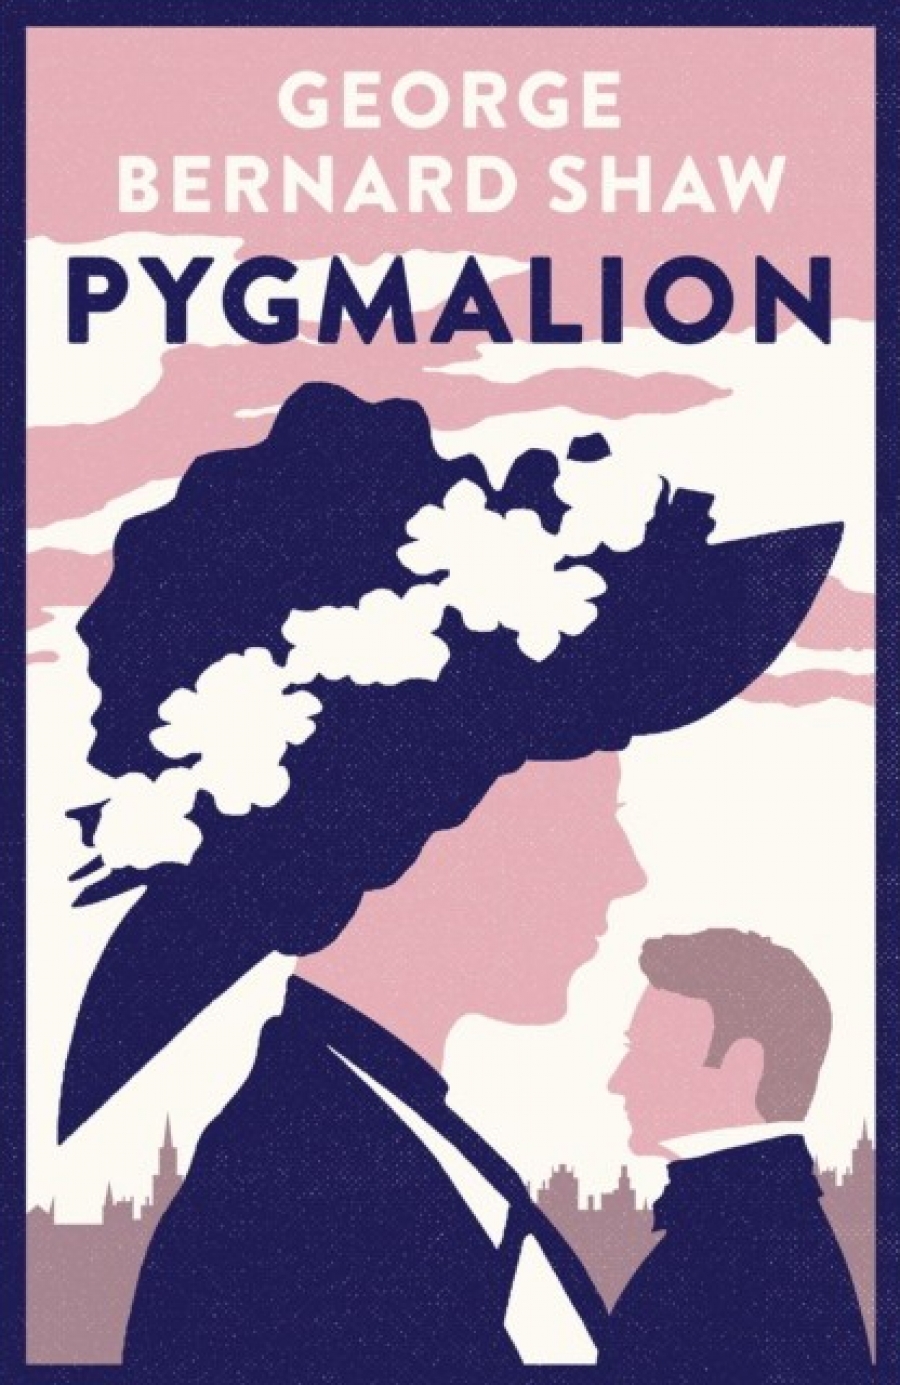 Shaw  George Bernard Pygmalion: 1941 version with variants from the 1916 edition 